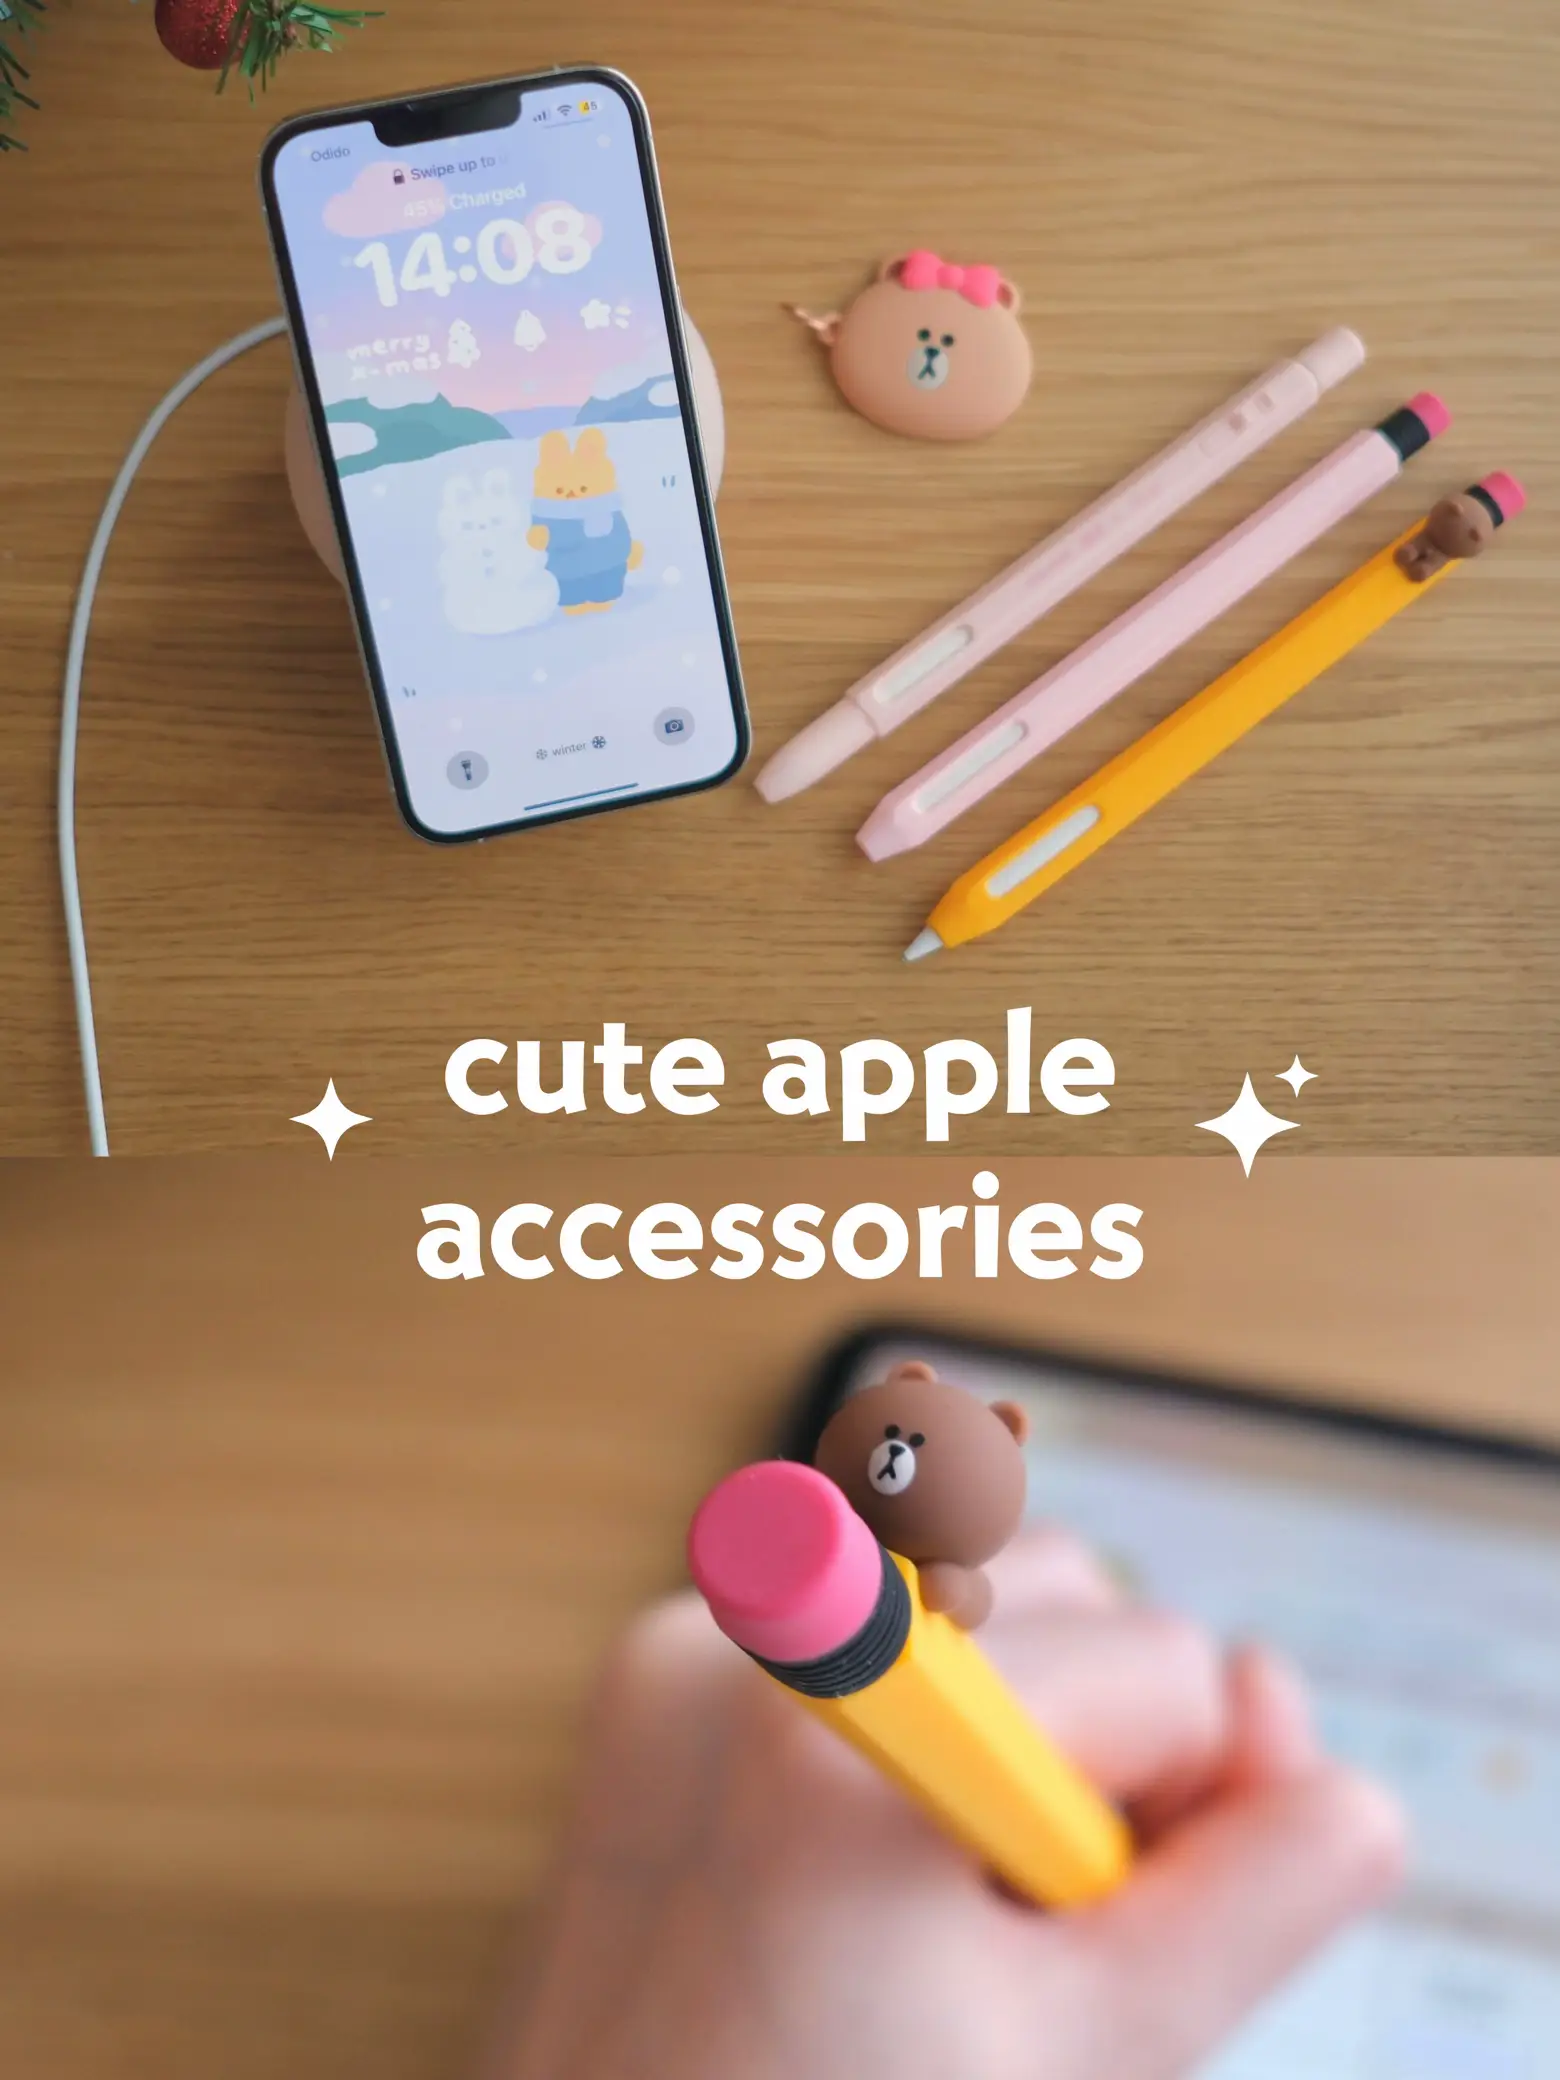 What Is The “Octobuddy” Phone Accessory TikTokers Are Obsessed With?